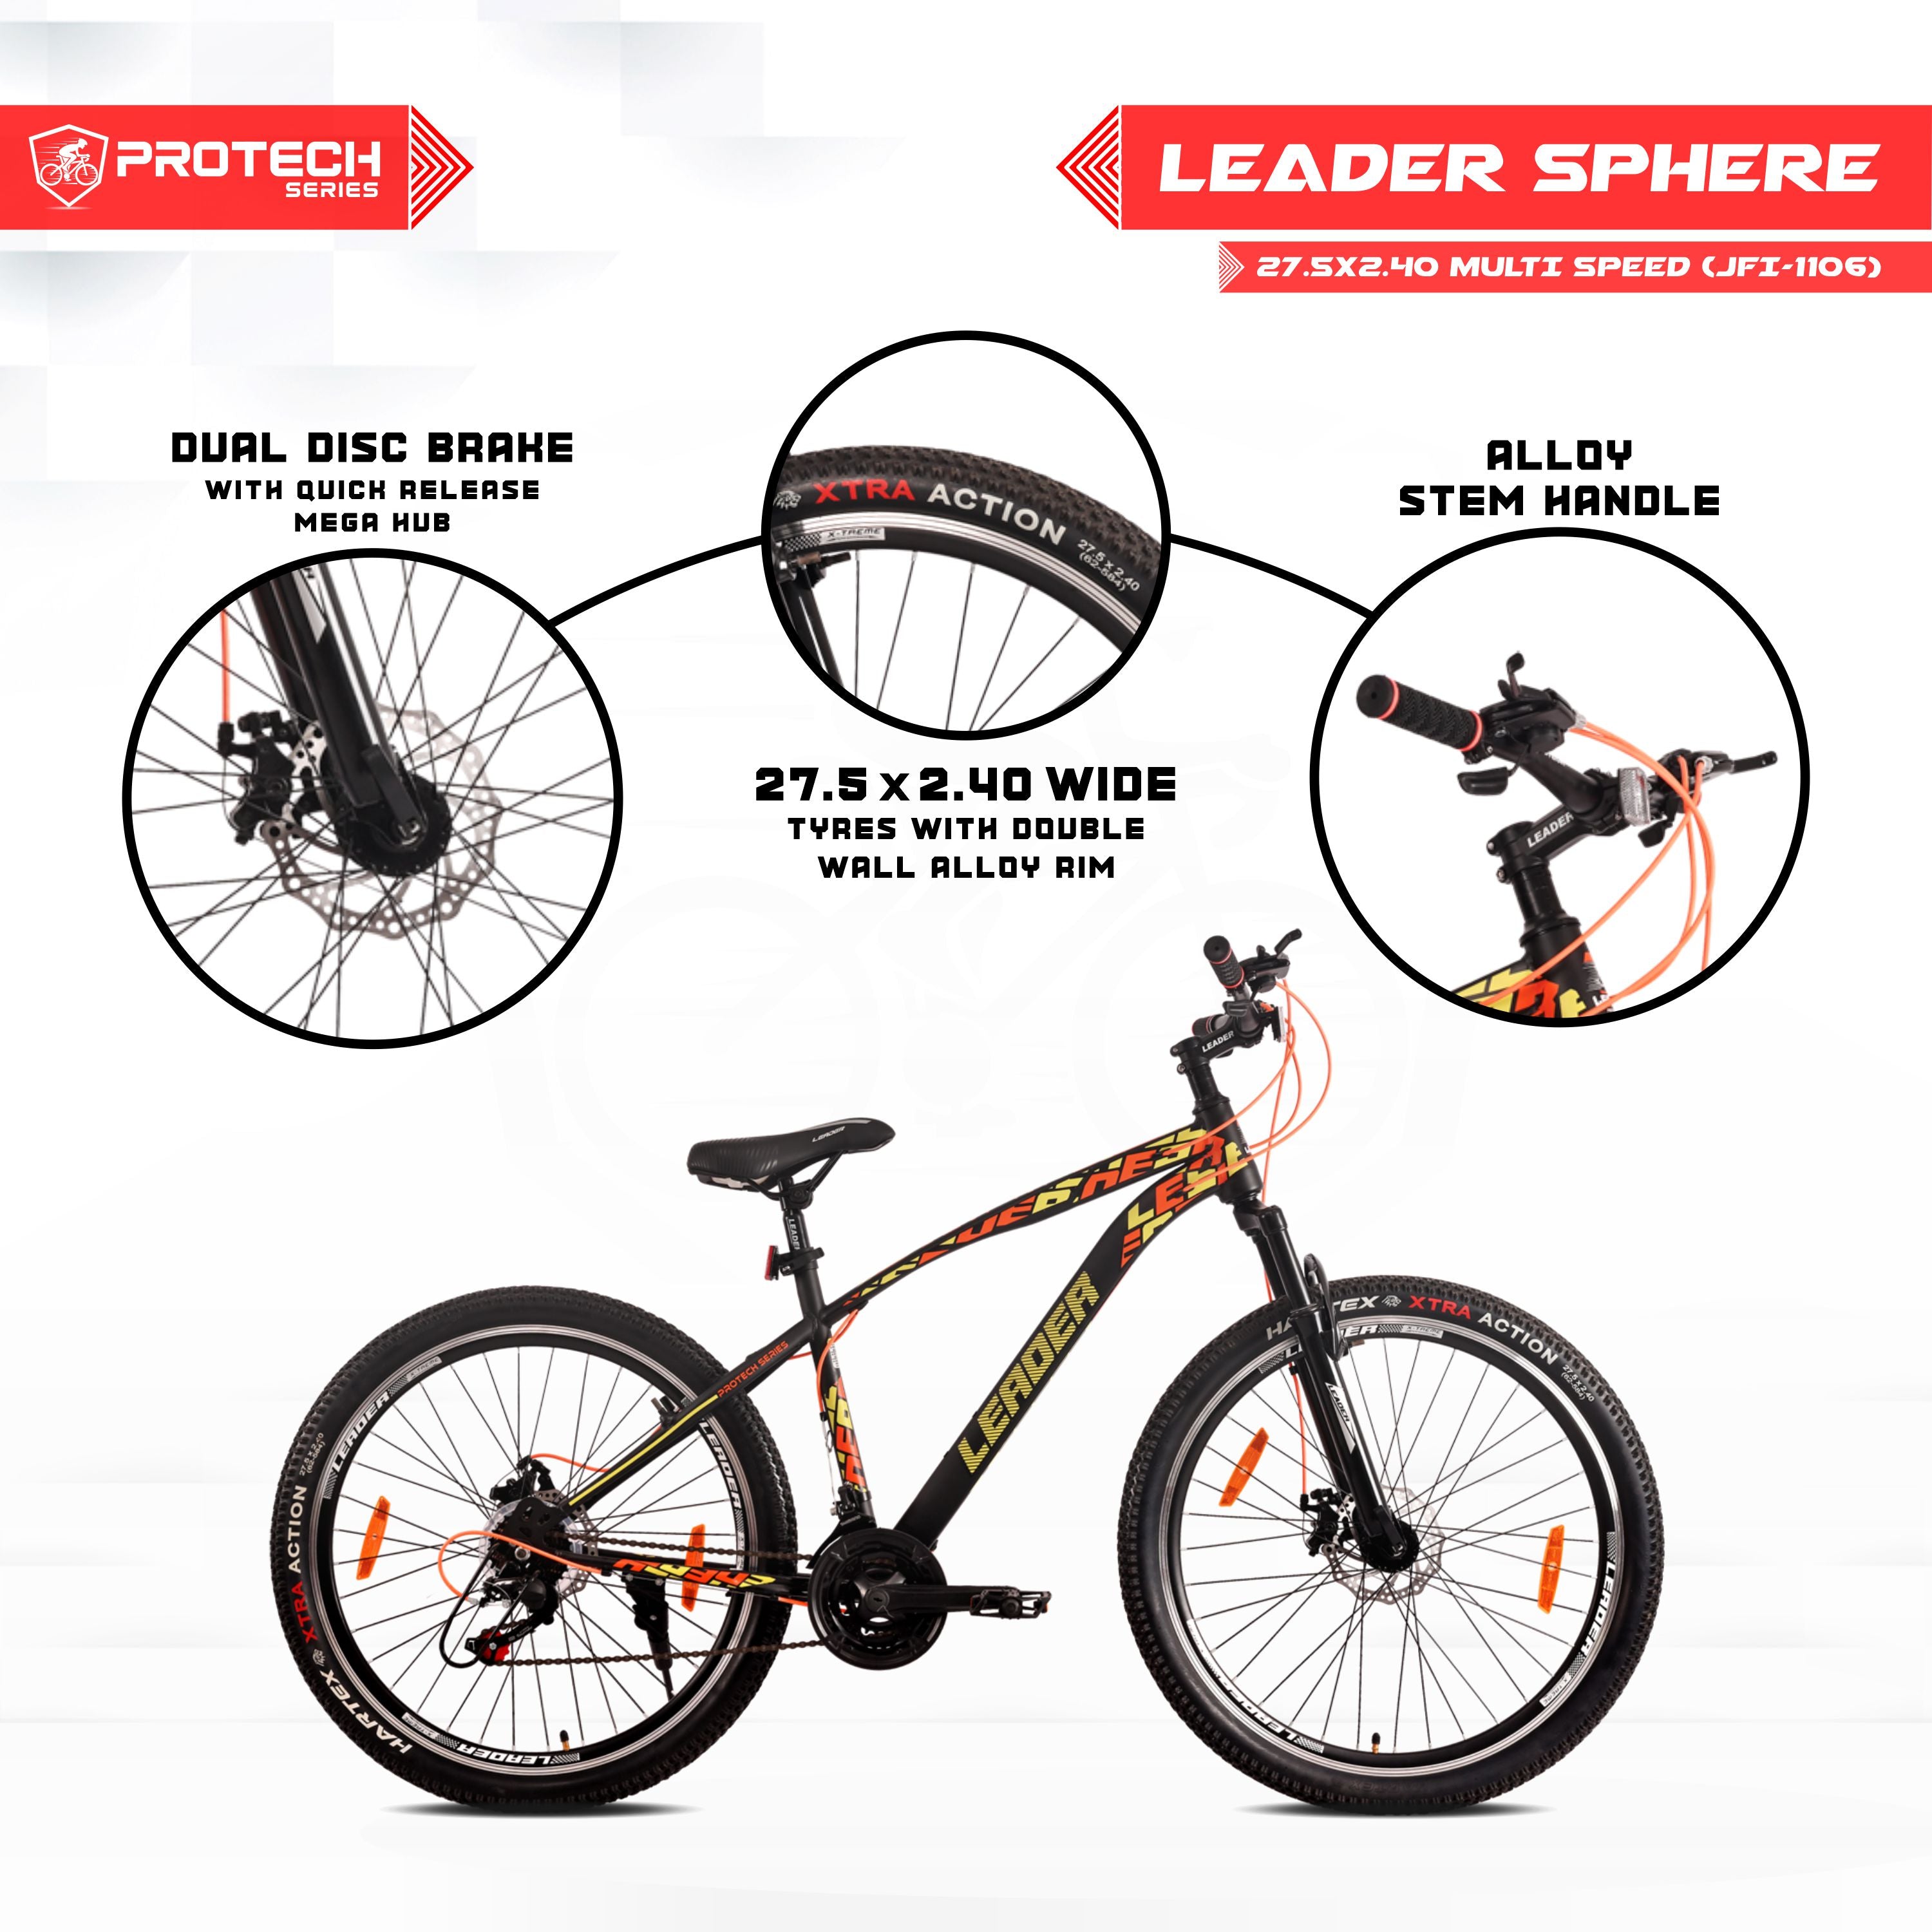 Leader Sphere 27.5T 21-Speed with Dual Disc Brake